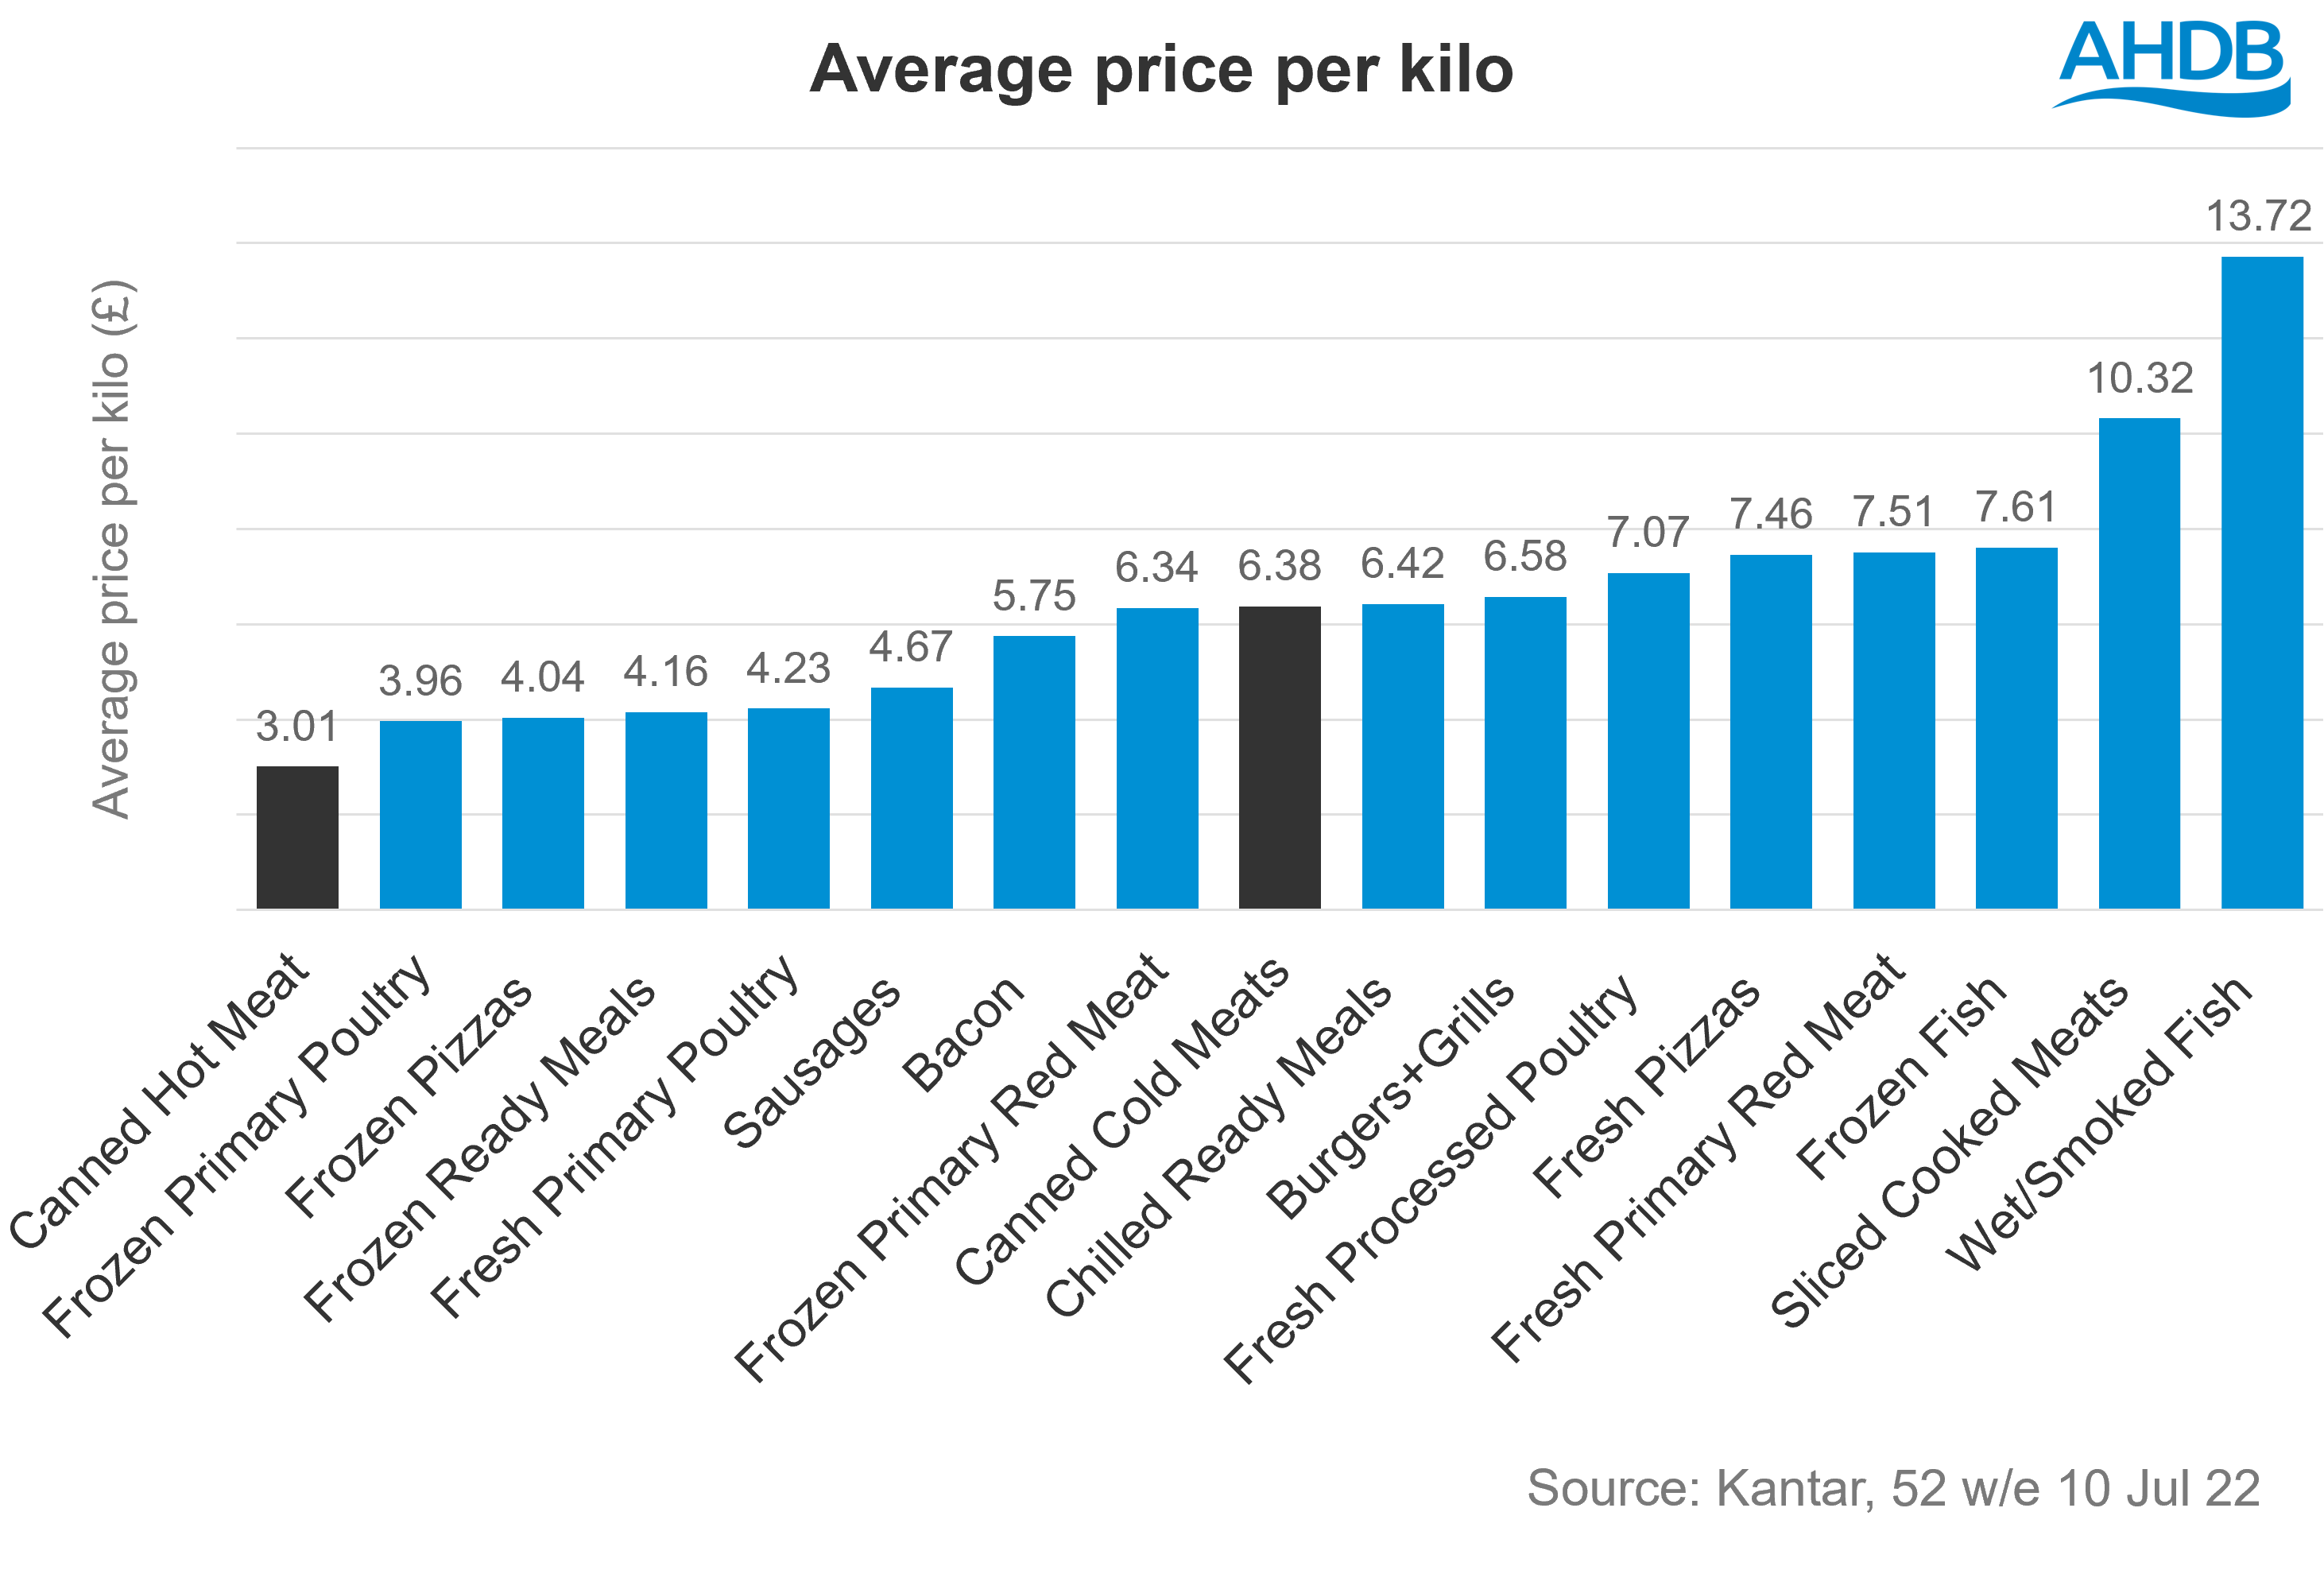 Chart showing average price of meat products